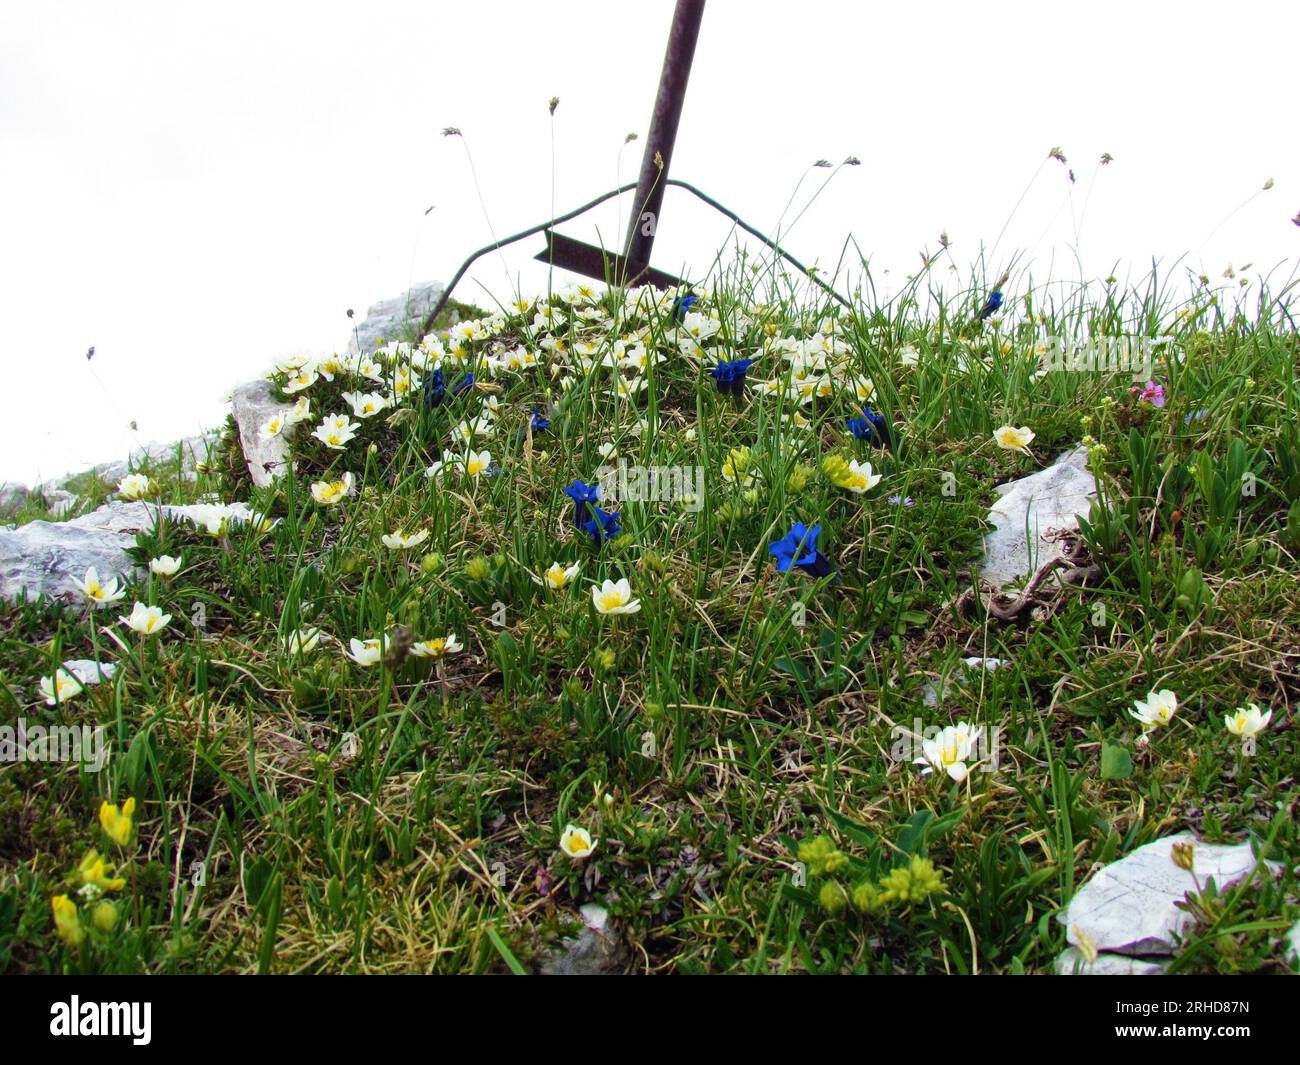 Alpine wild garden with white mountain avens (Dryas octopetala) and blue Clusius' gentian (Gentiana clusii) flowers and a cross above Stock Photo